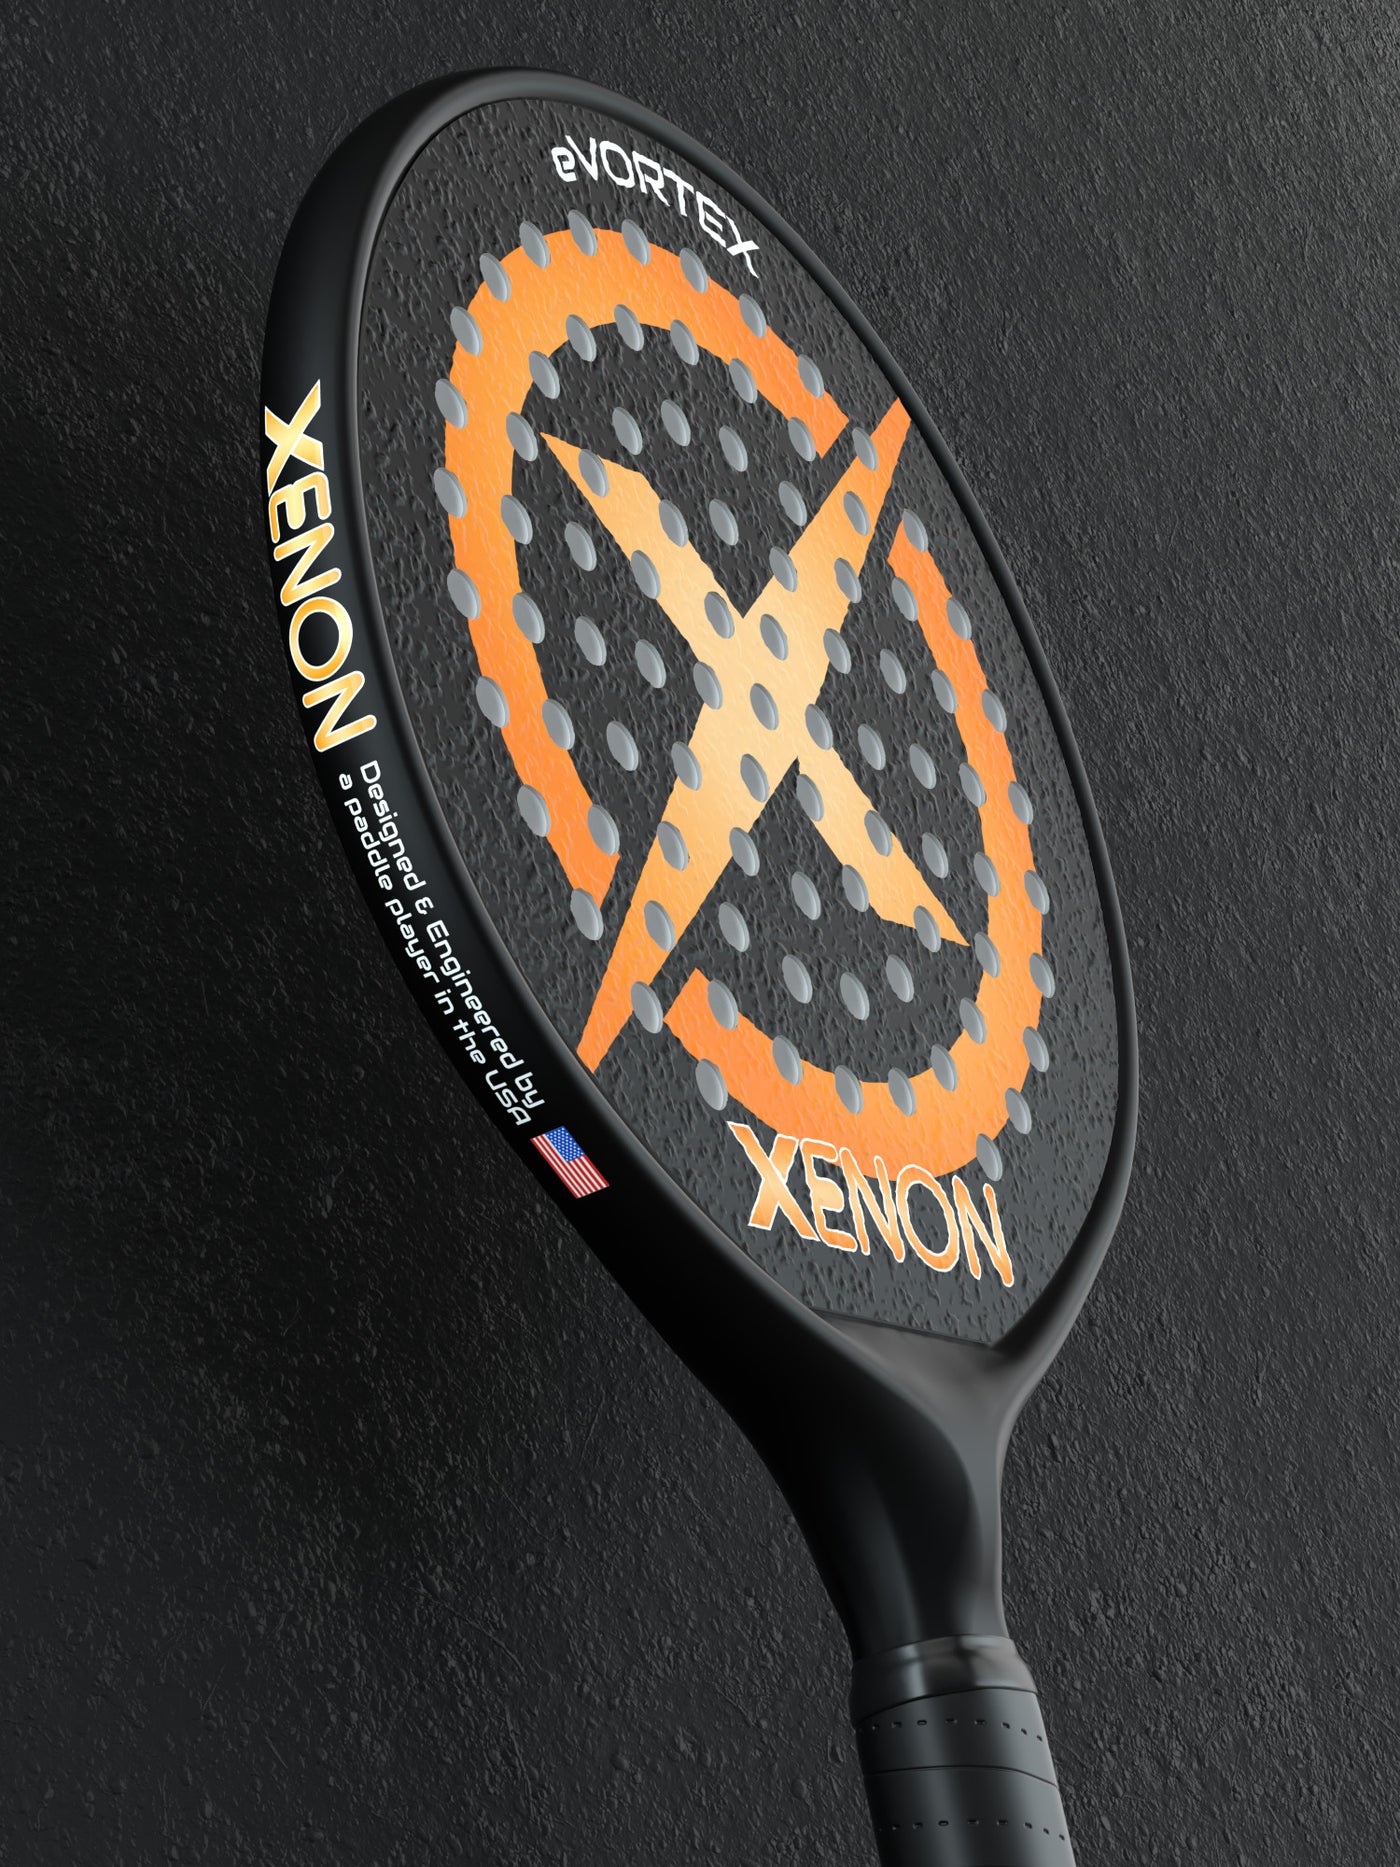 eVortex - Paddle Tennis Racket With Heated Handle by Xenon Paddle Angle View